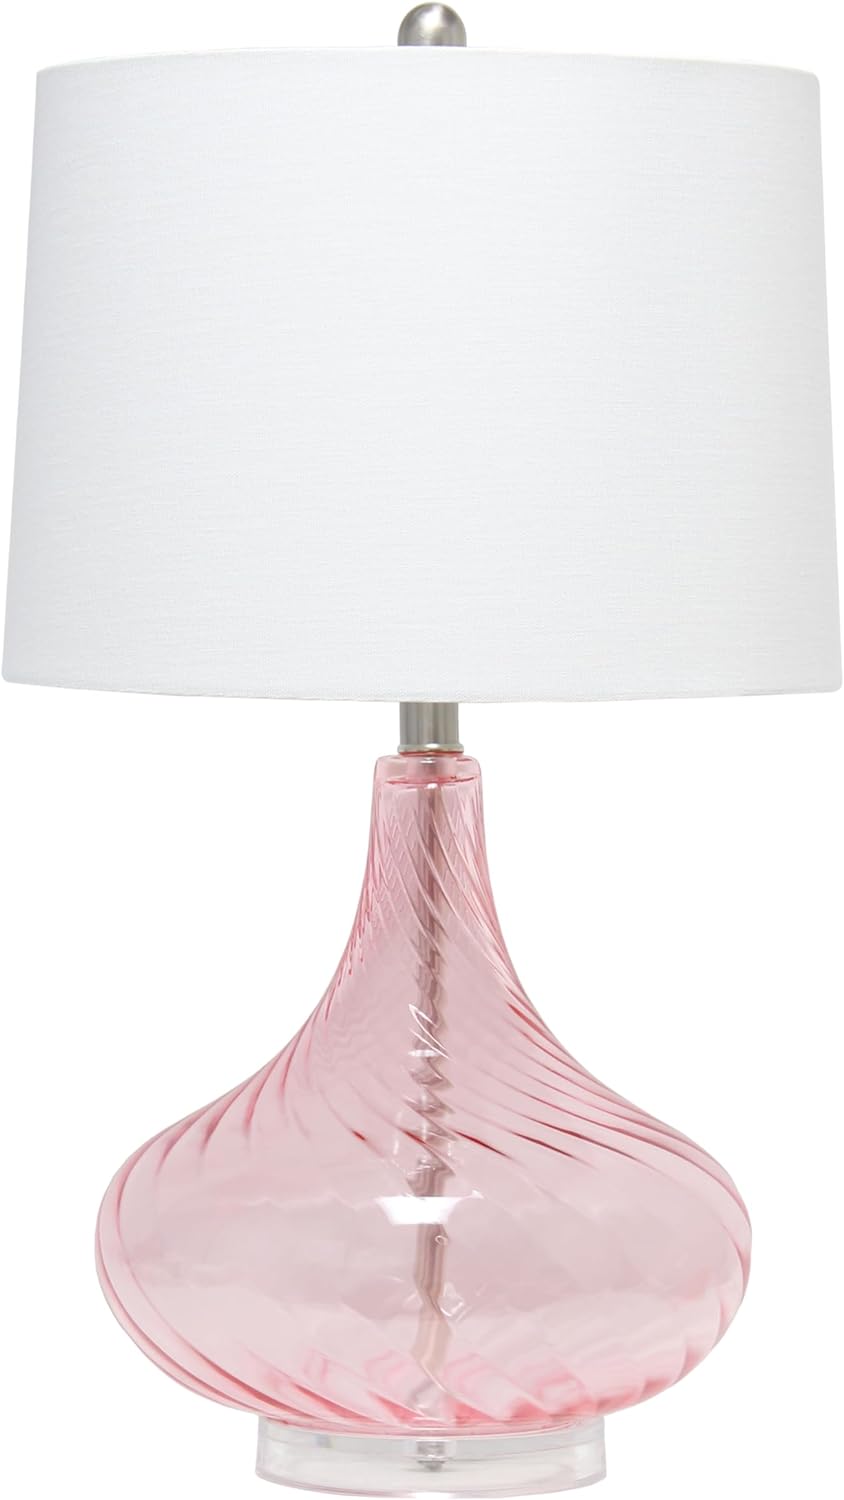 23.25 Inch Classix Contemporary Rippled Colored Glass Bedside Desk Table Lamp